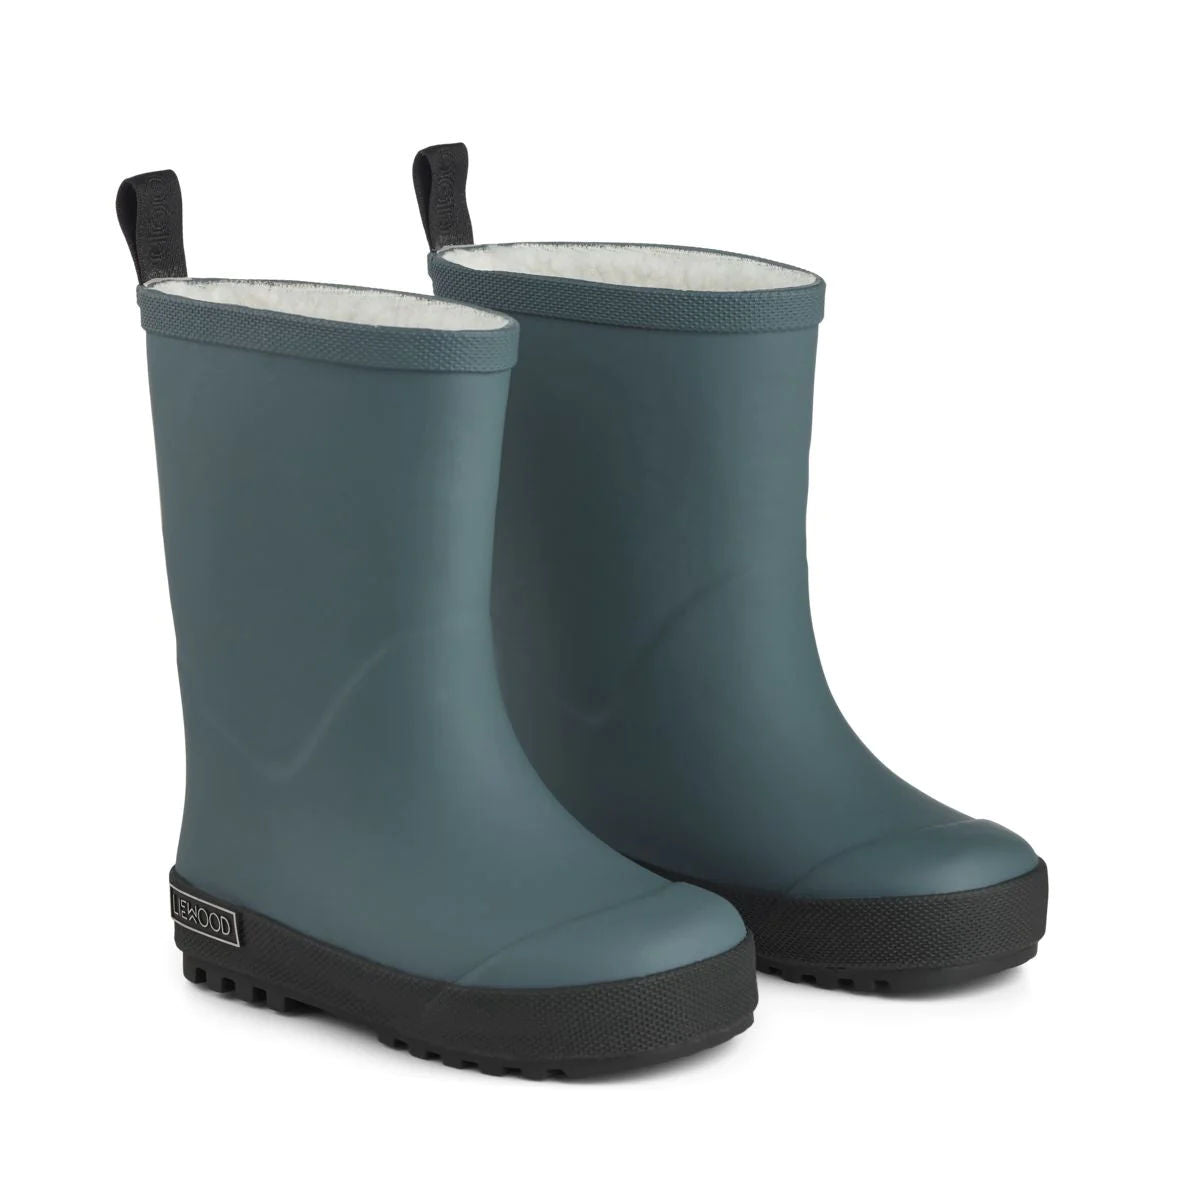 LIEWOOD - Thermo rainboot -  Whale blue